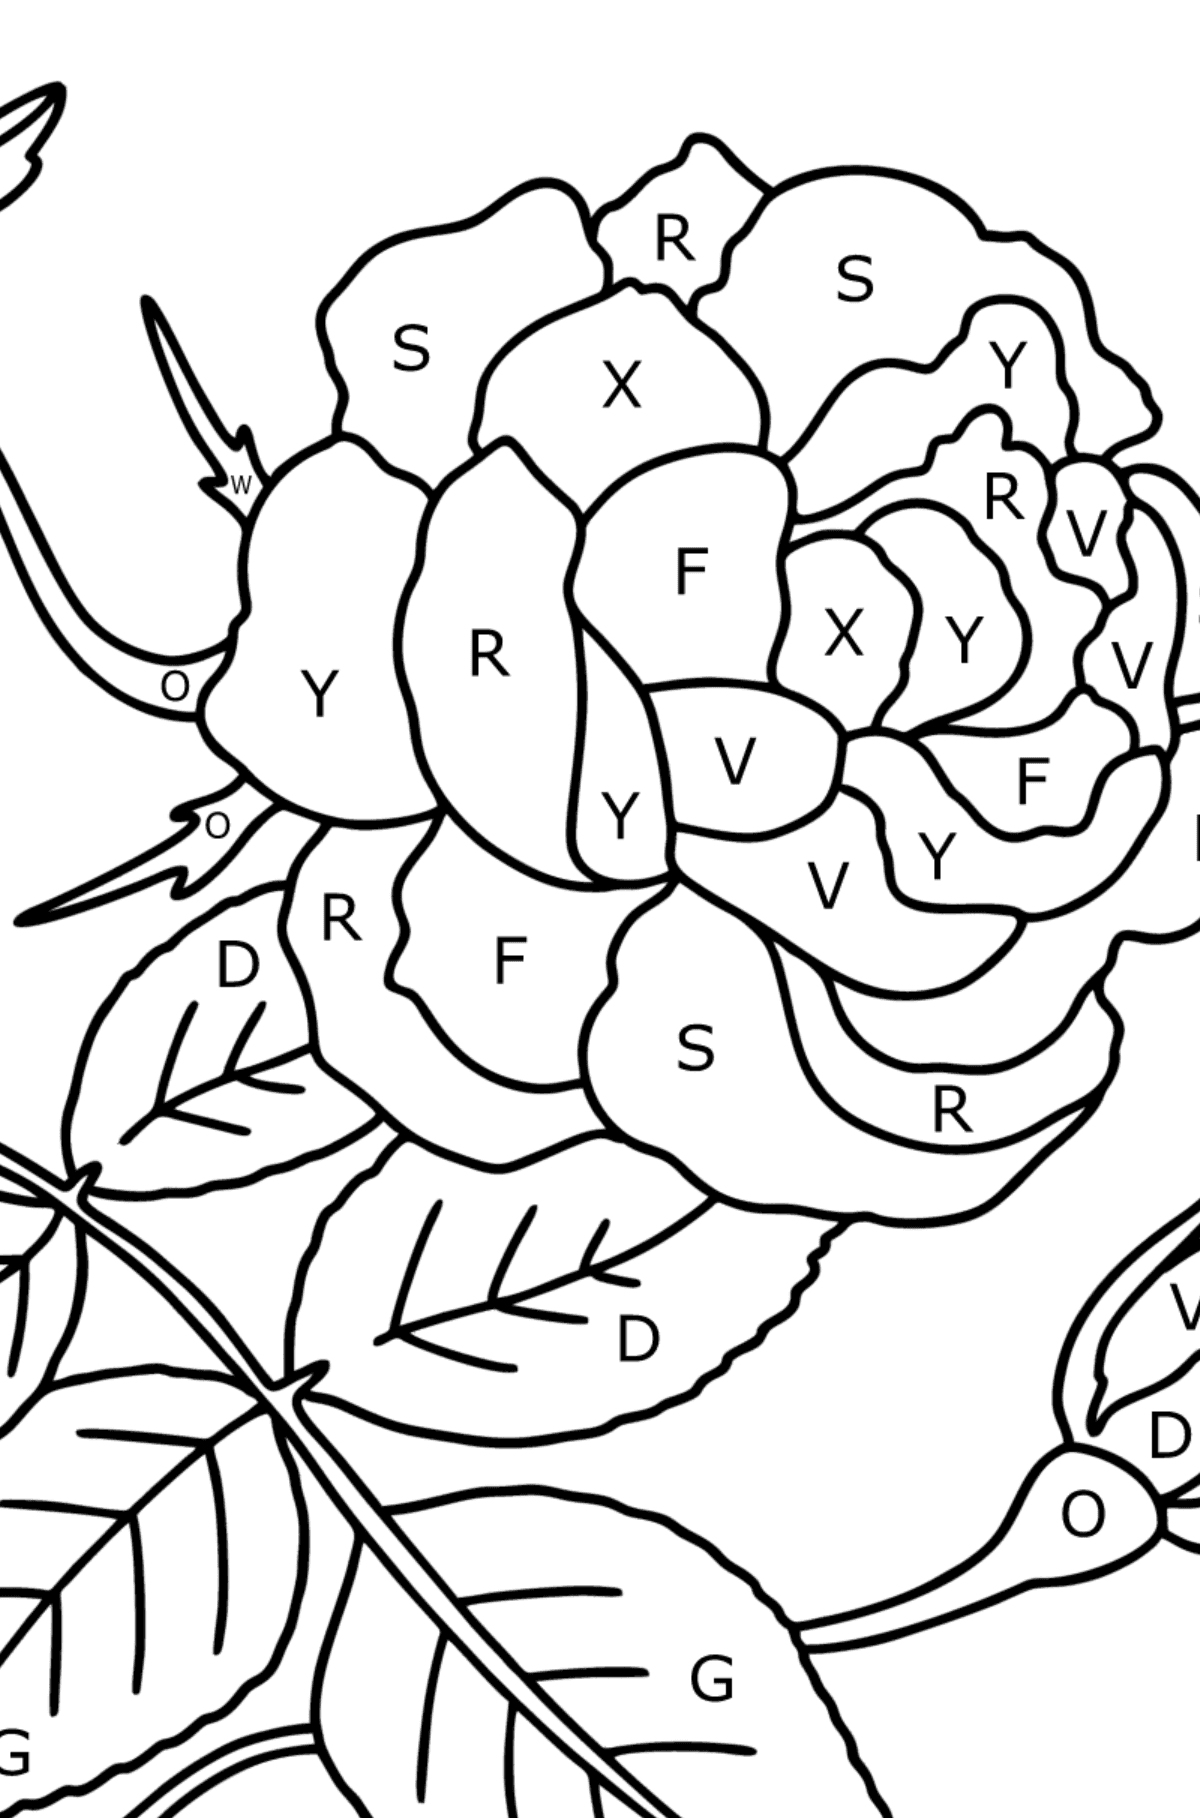 Climbing rose red coloring page - Coloring by Letters for Kids